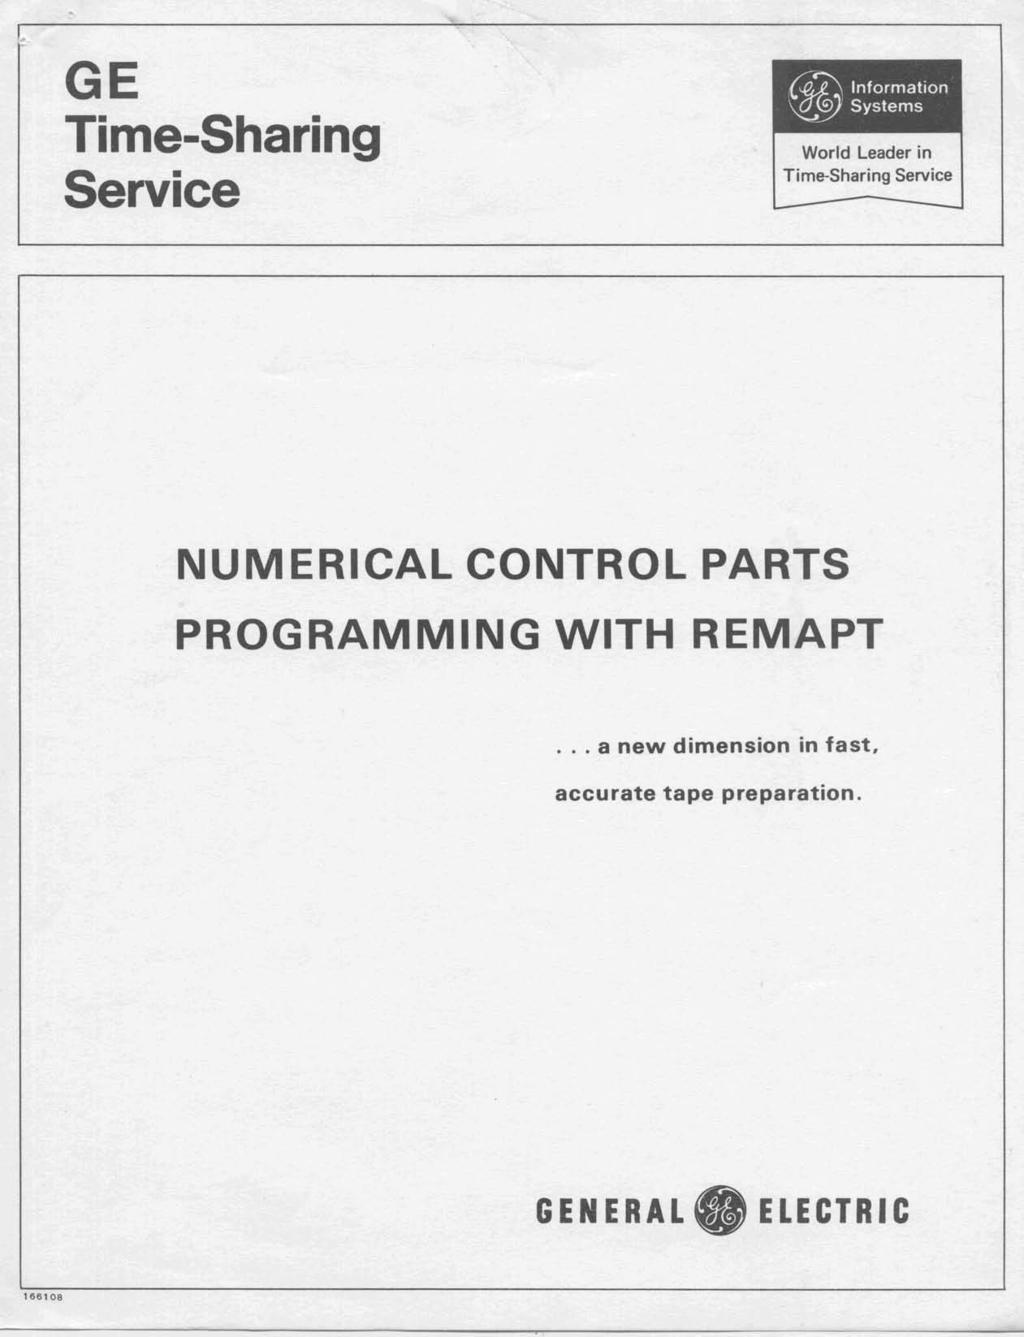 GE Time-sharing Service World Leader in - 1 NUMERICAL CONTROL PARTS PROGRAMMING WITH